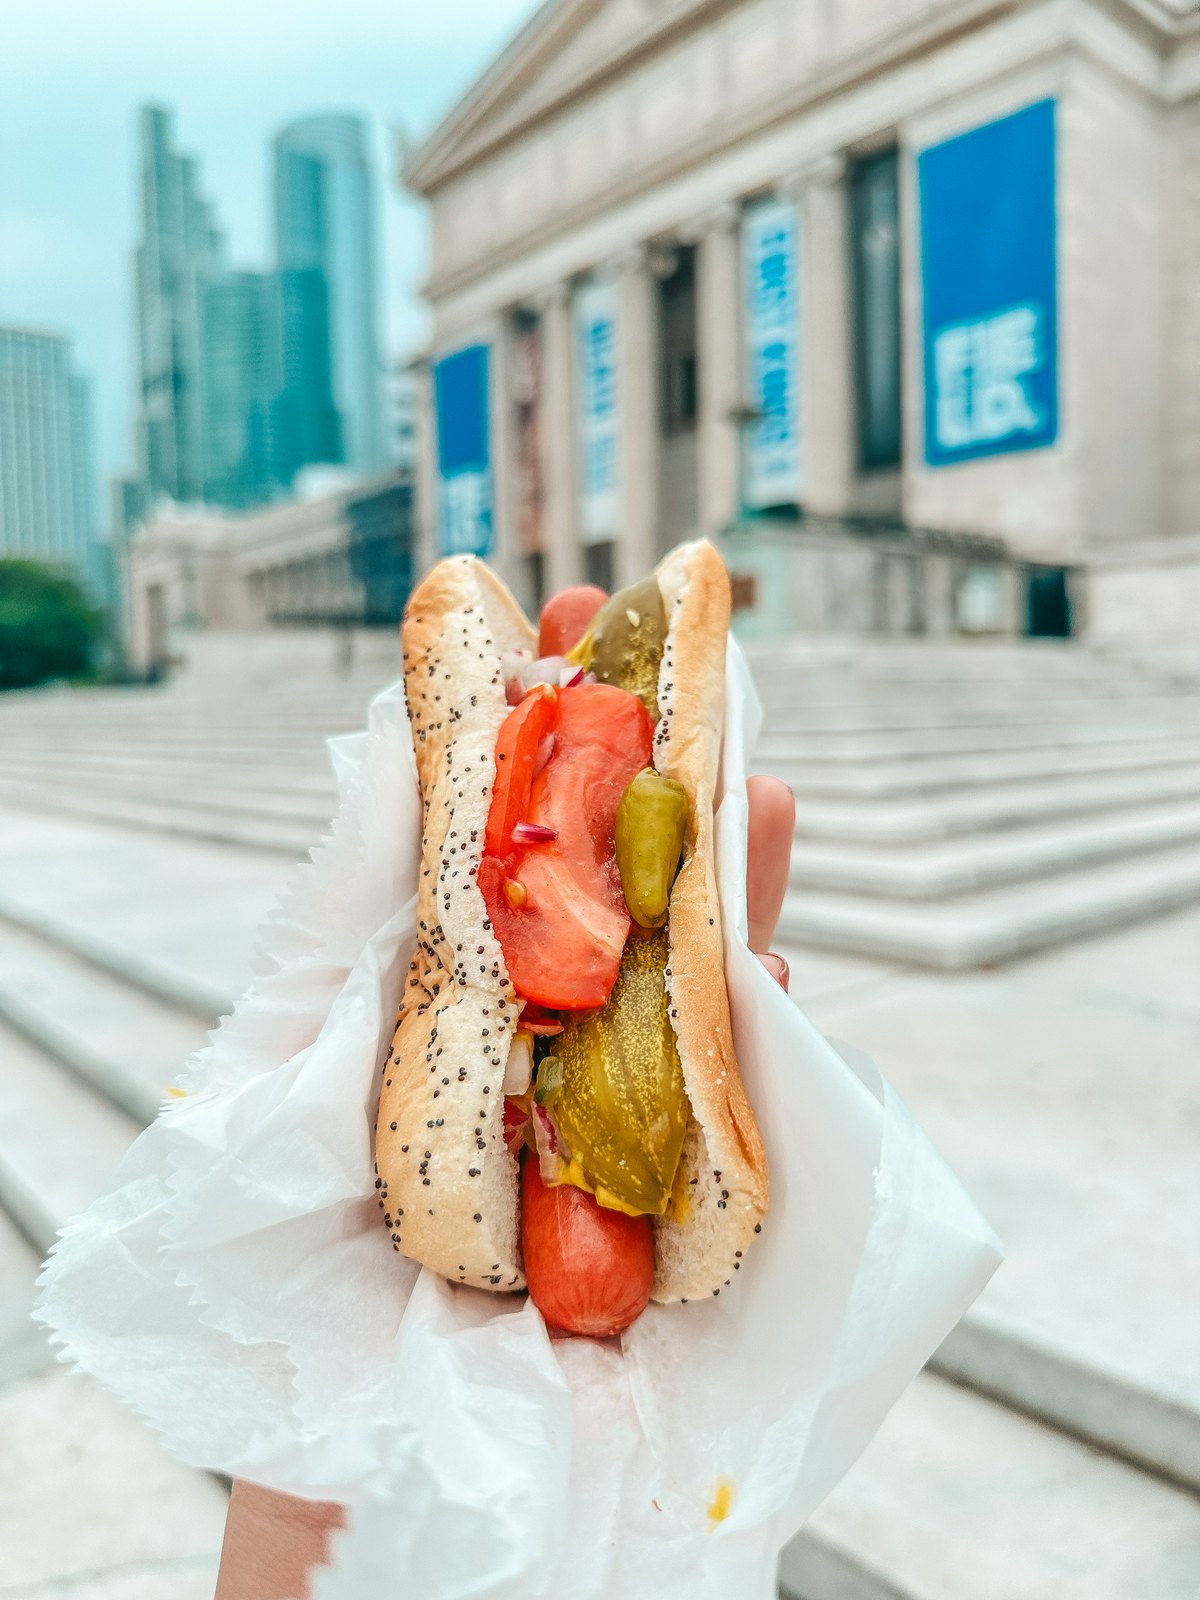 Chicago style hot dog in Chicago